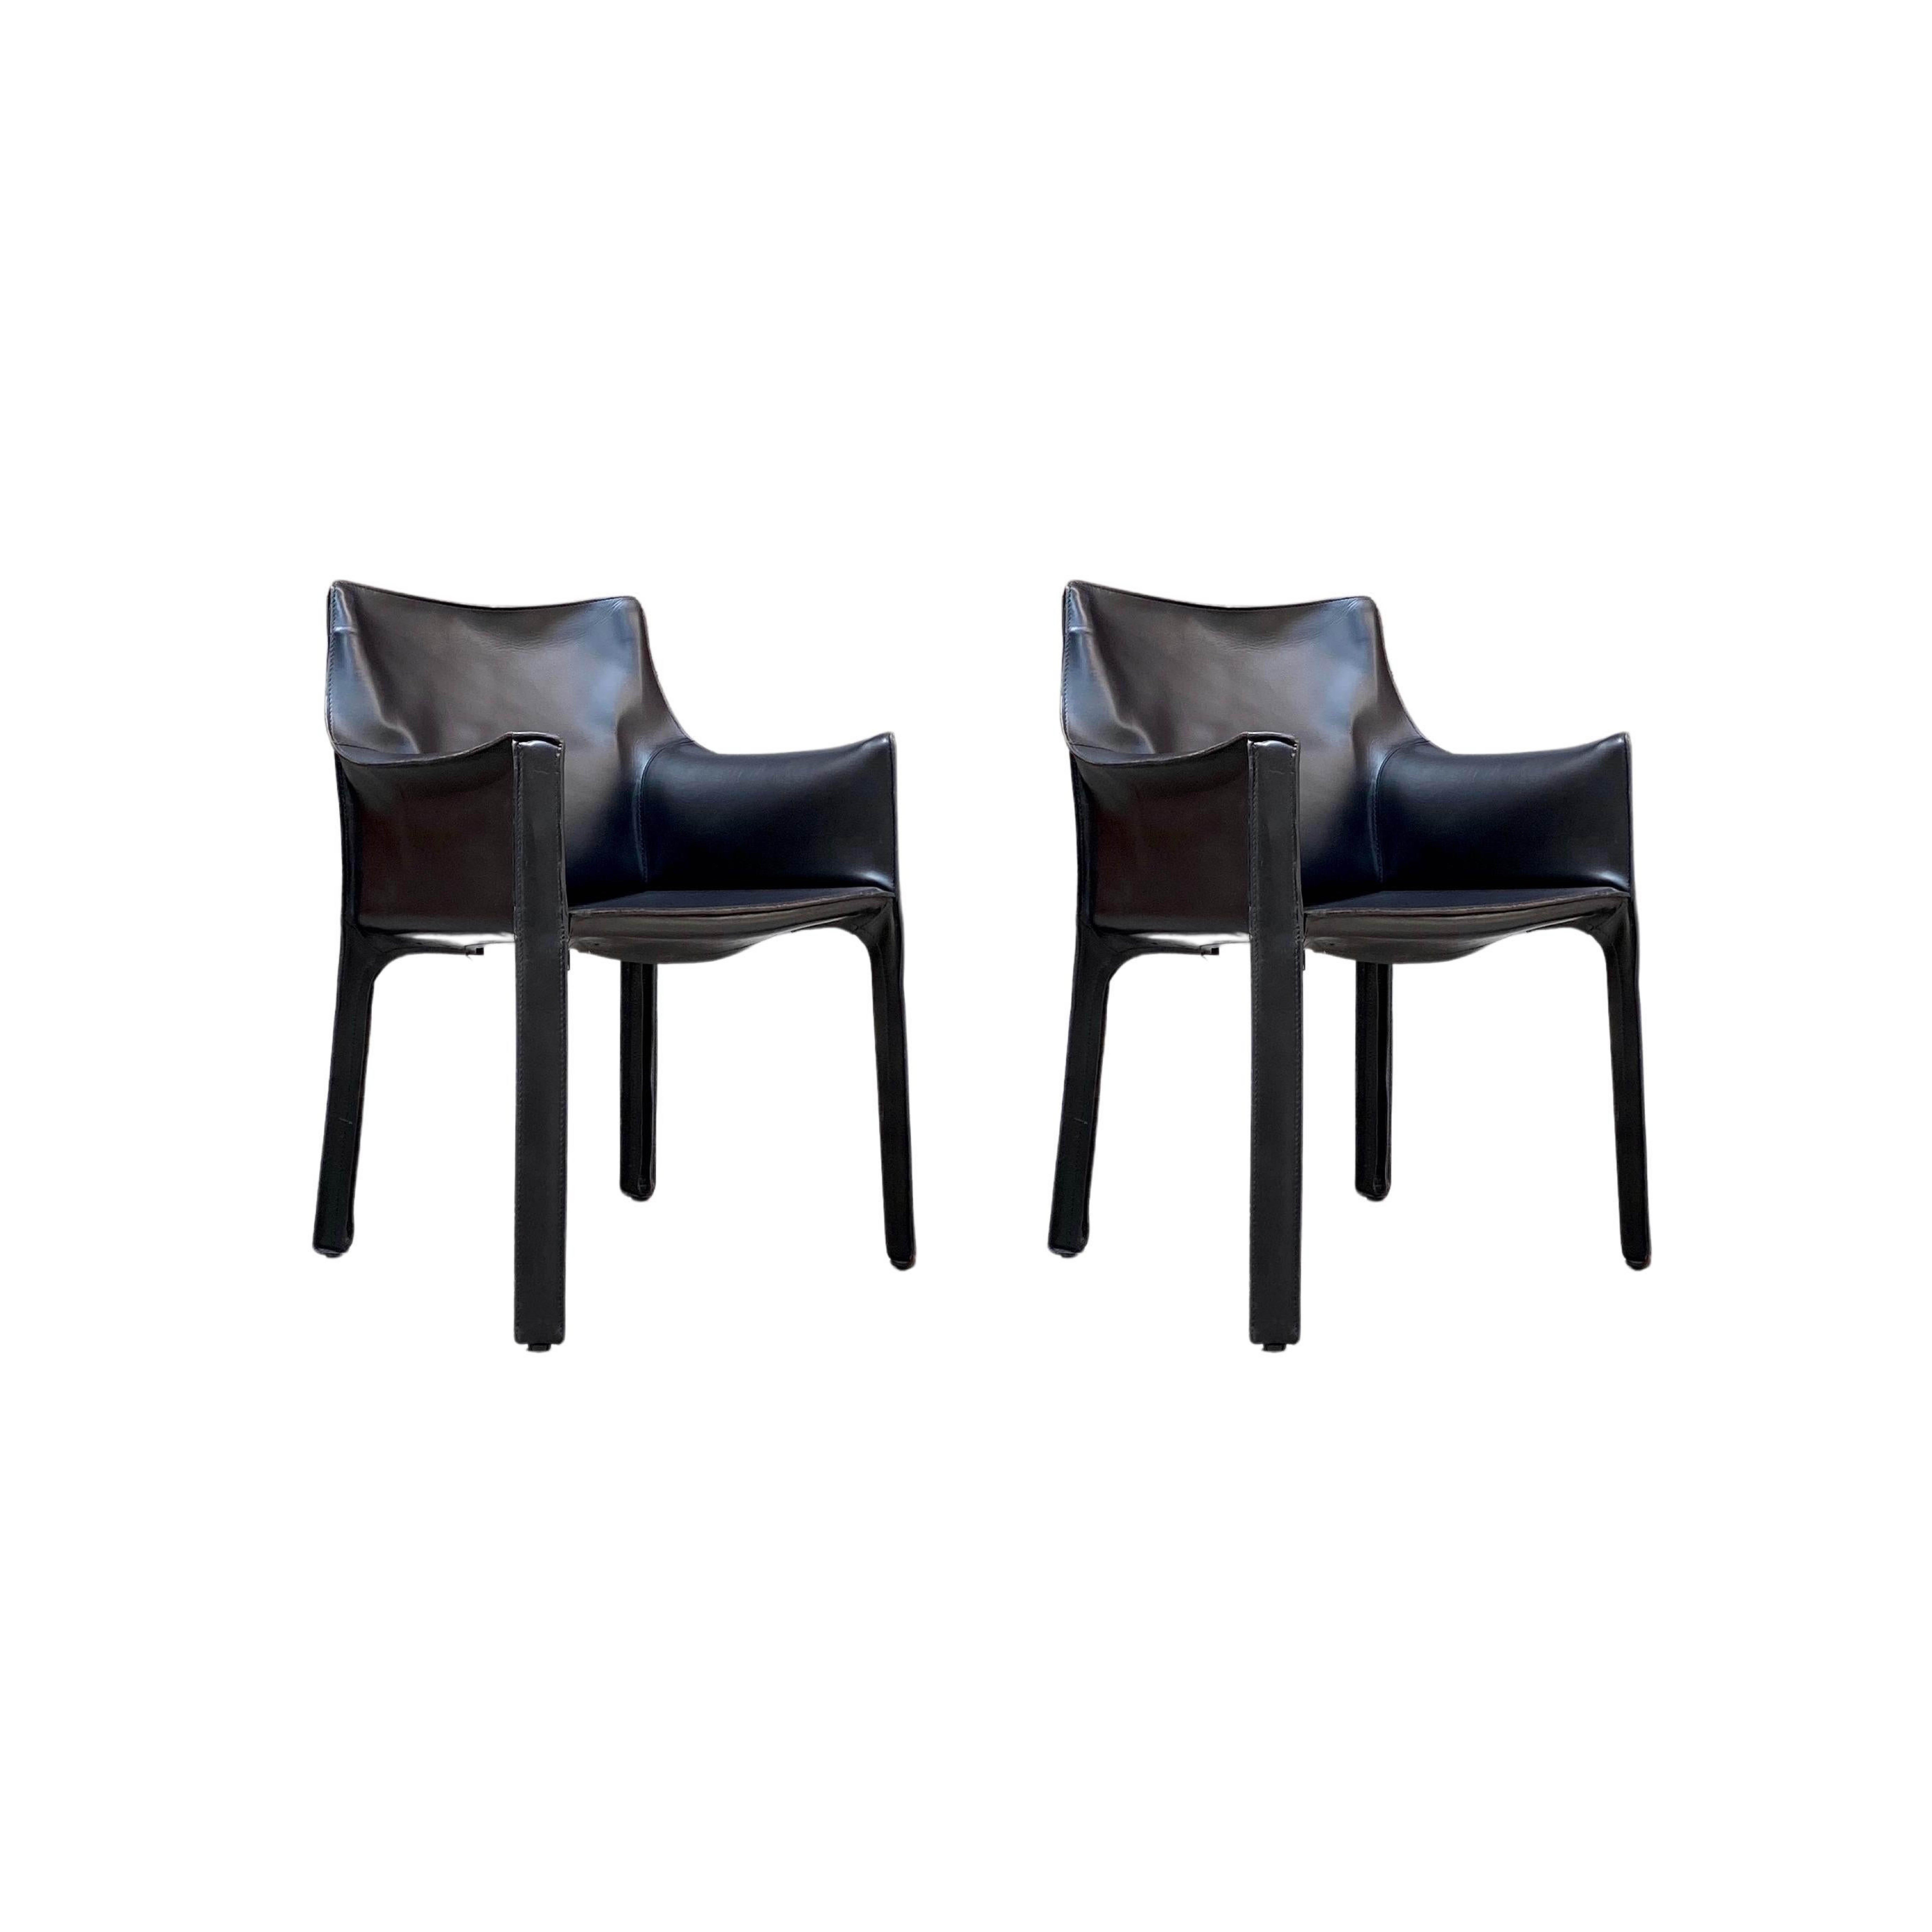 Mario Bellini "CAB 413" Dining Chairs for Cassina, 1977, set of 2 For Sale